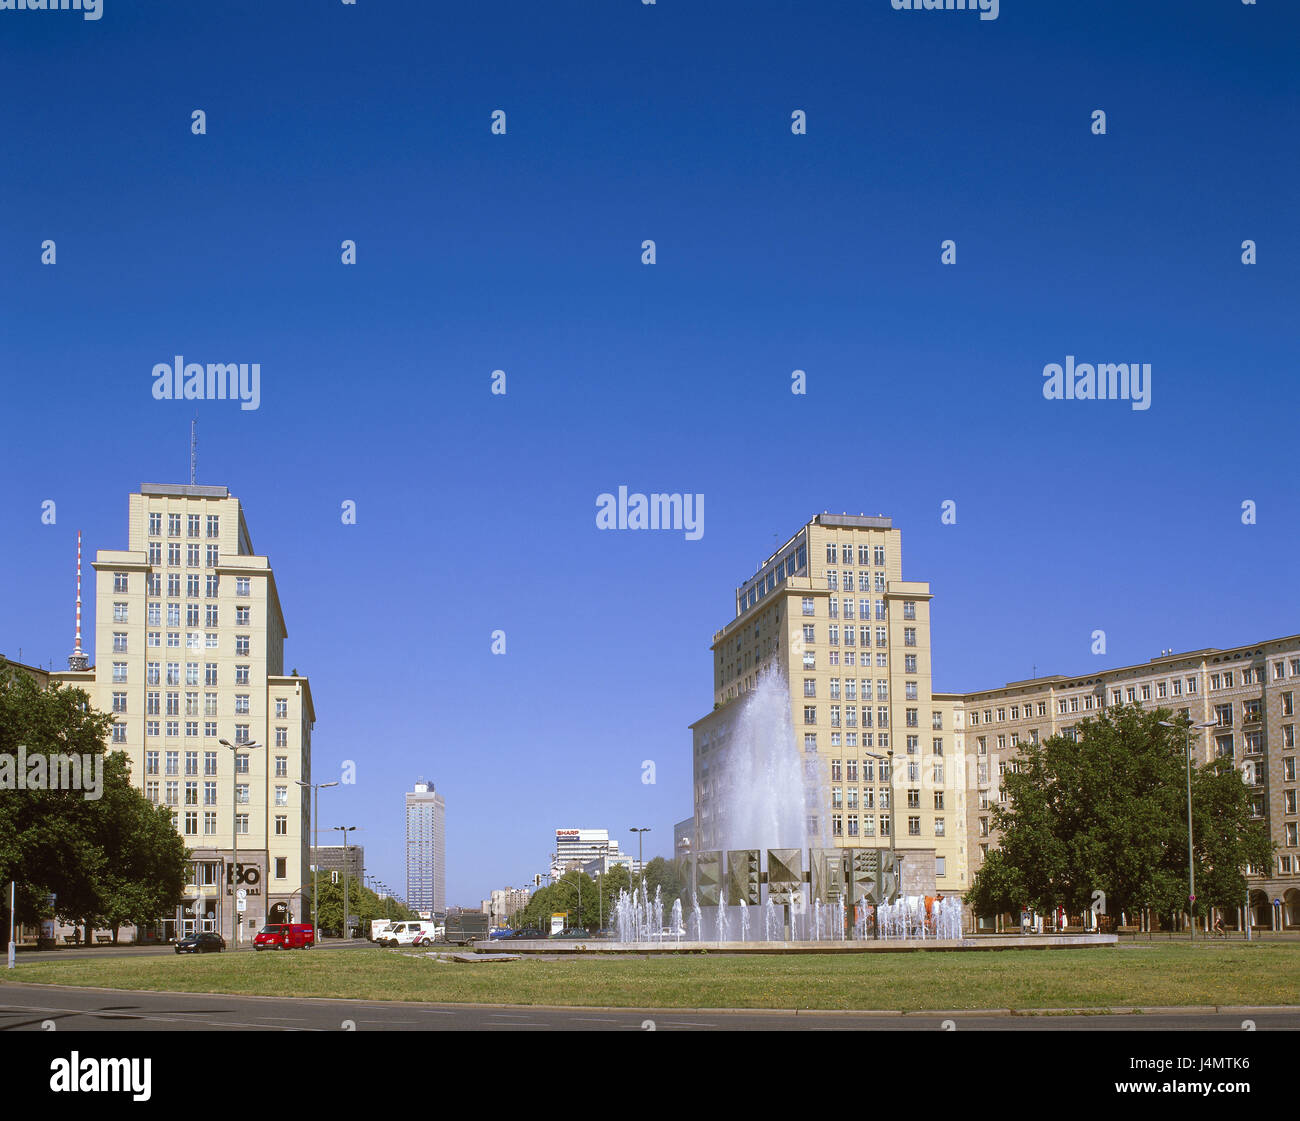 Germany, Berlin, Friedrich's grove, Frankfurt avenue, Straußberger space Fountain Europe, town, city, capital, part of town, Strausberger square, ring well, floating ring, buildings a tower, high rises, architect Hermann Henselmann Stock Photo